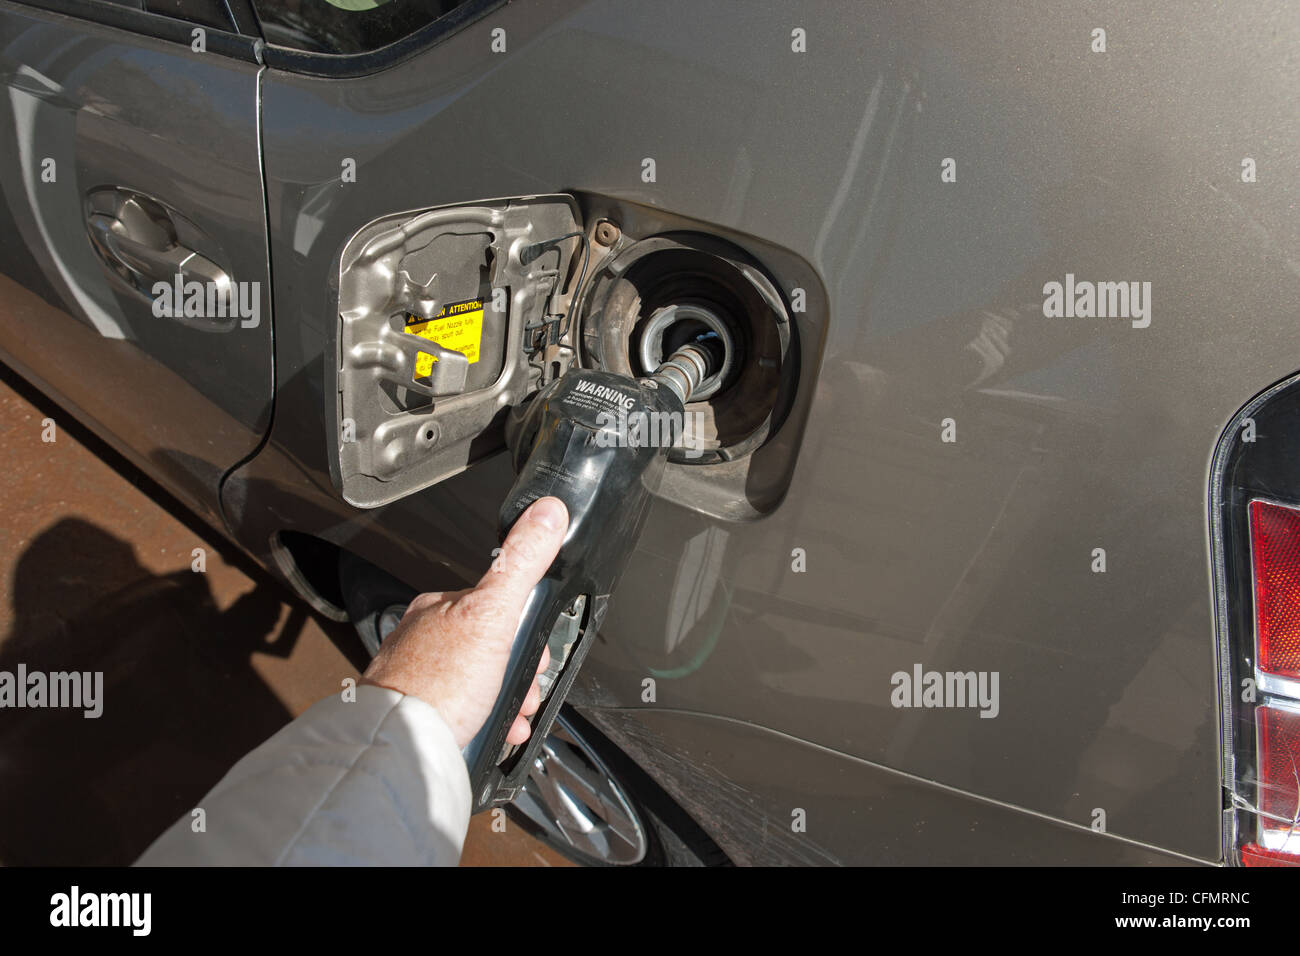 close up of hand pumping gas into a Toyota Prius. Stock Photo